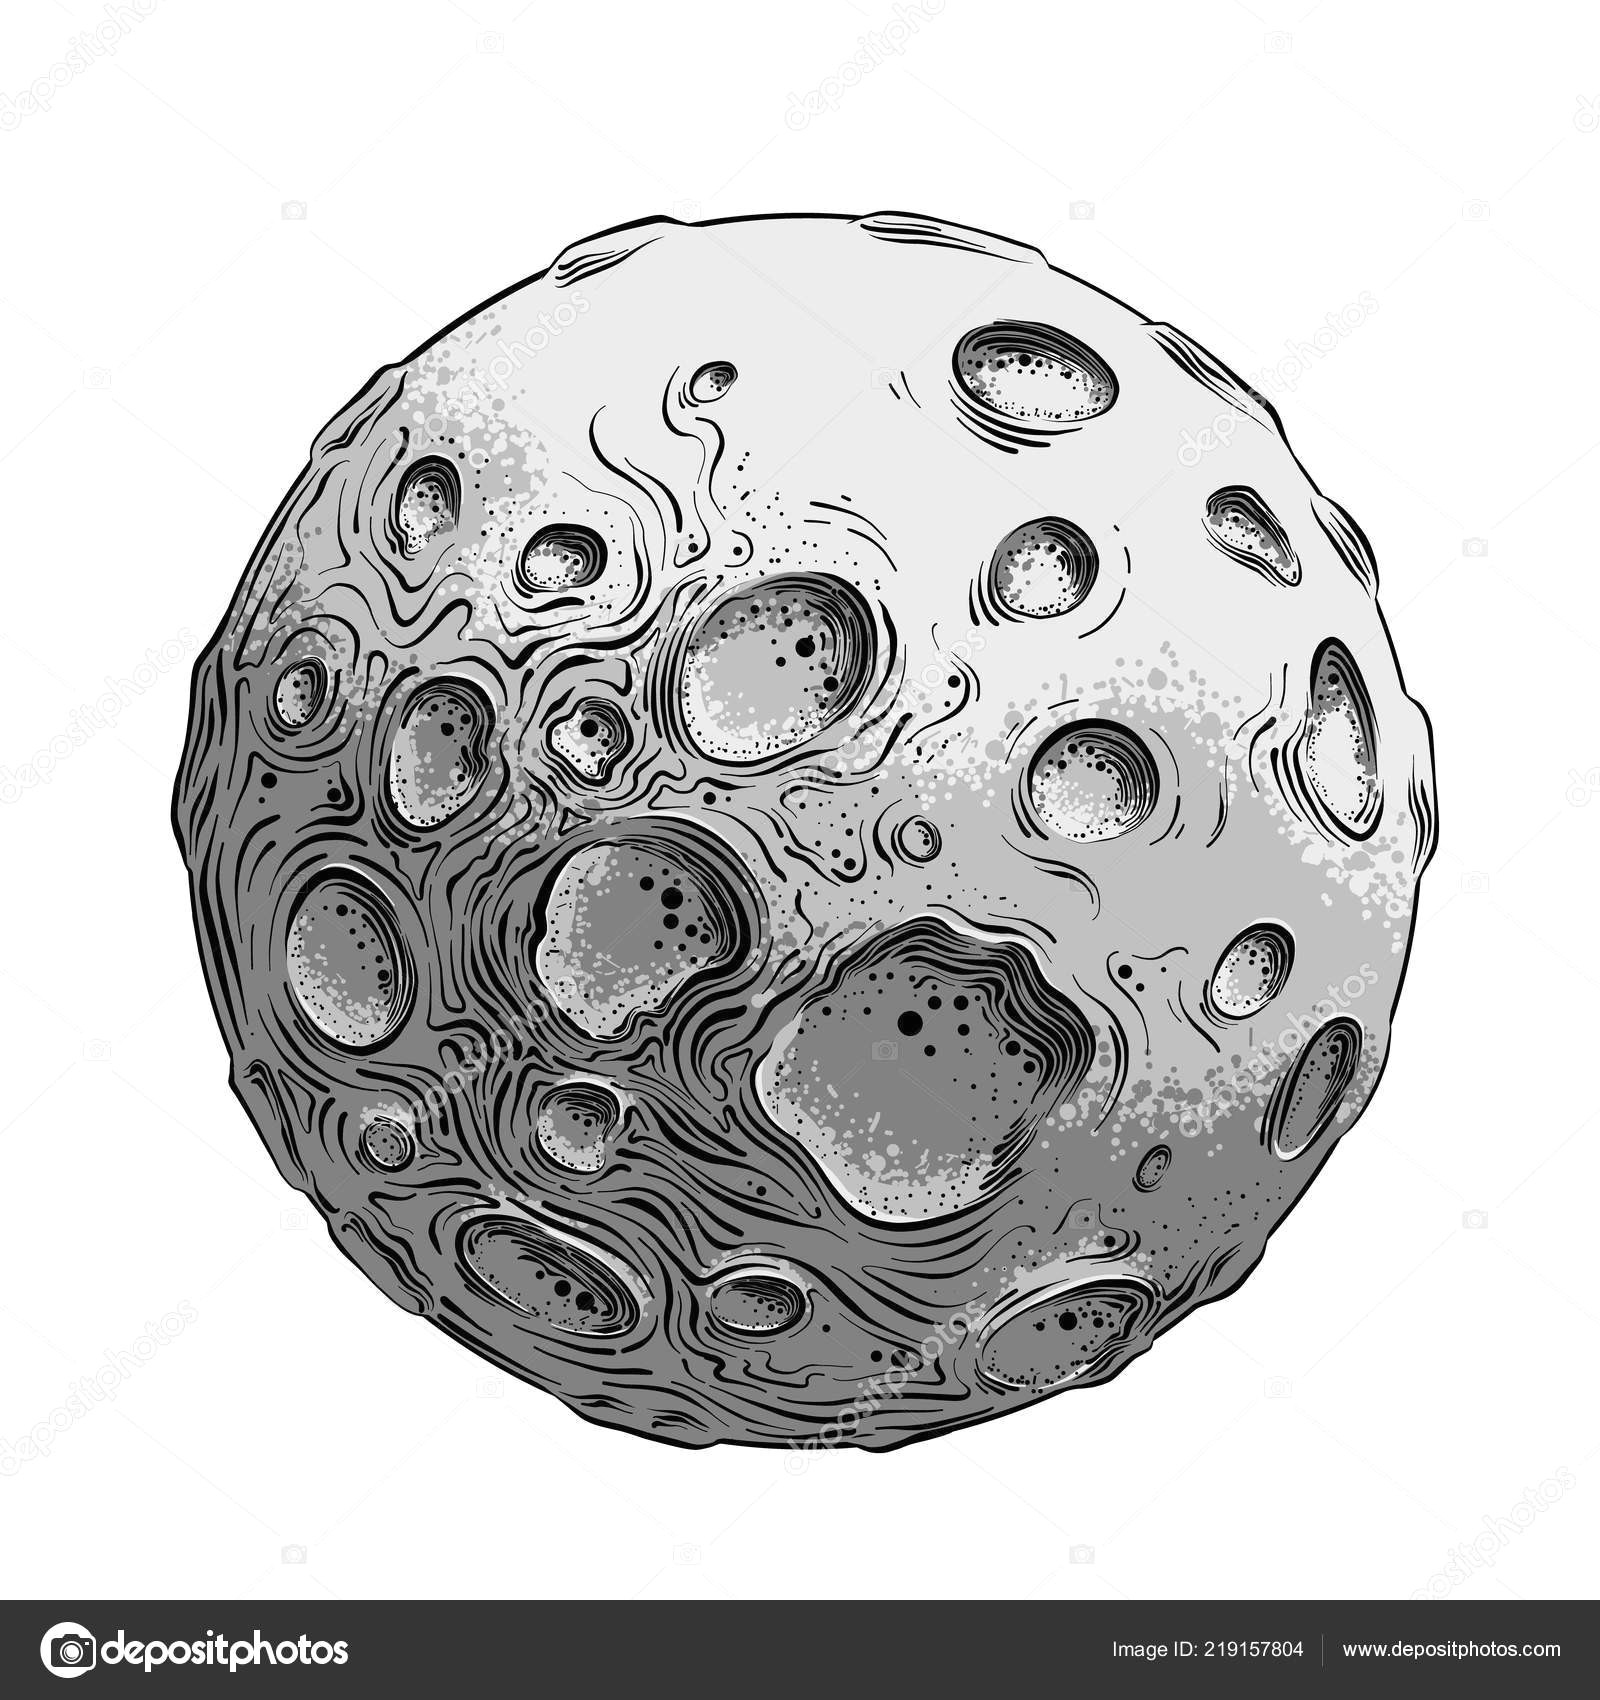 hand drawn sketch of moon planet in black and white color isolated on white background